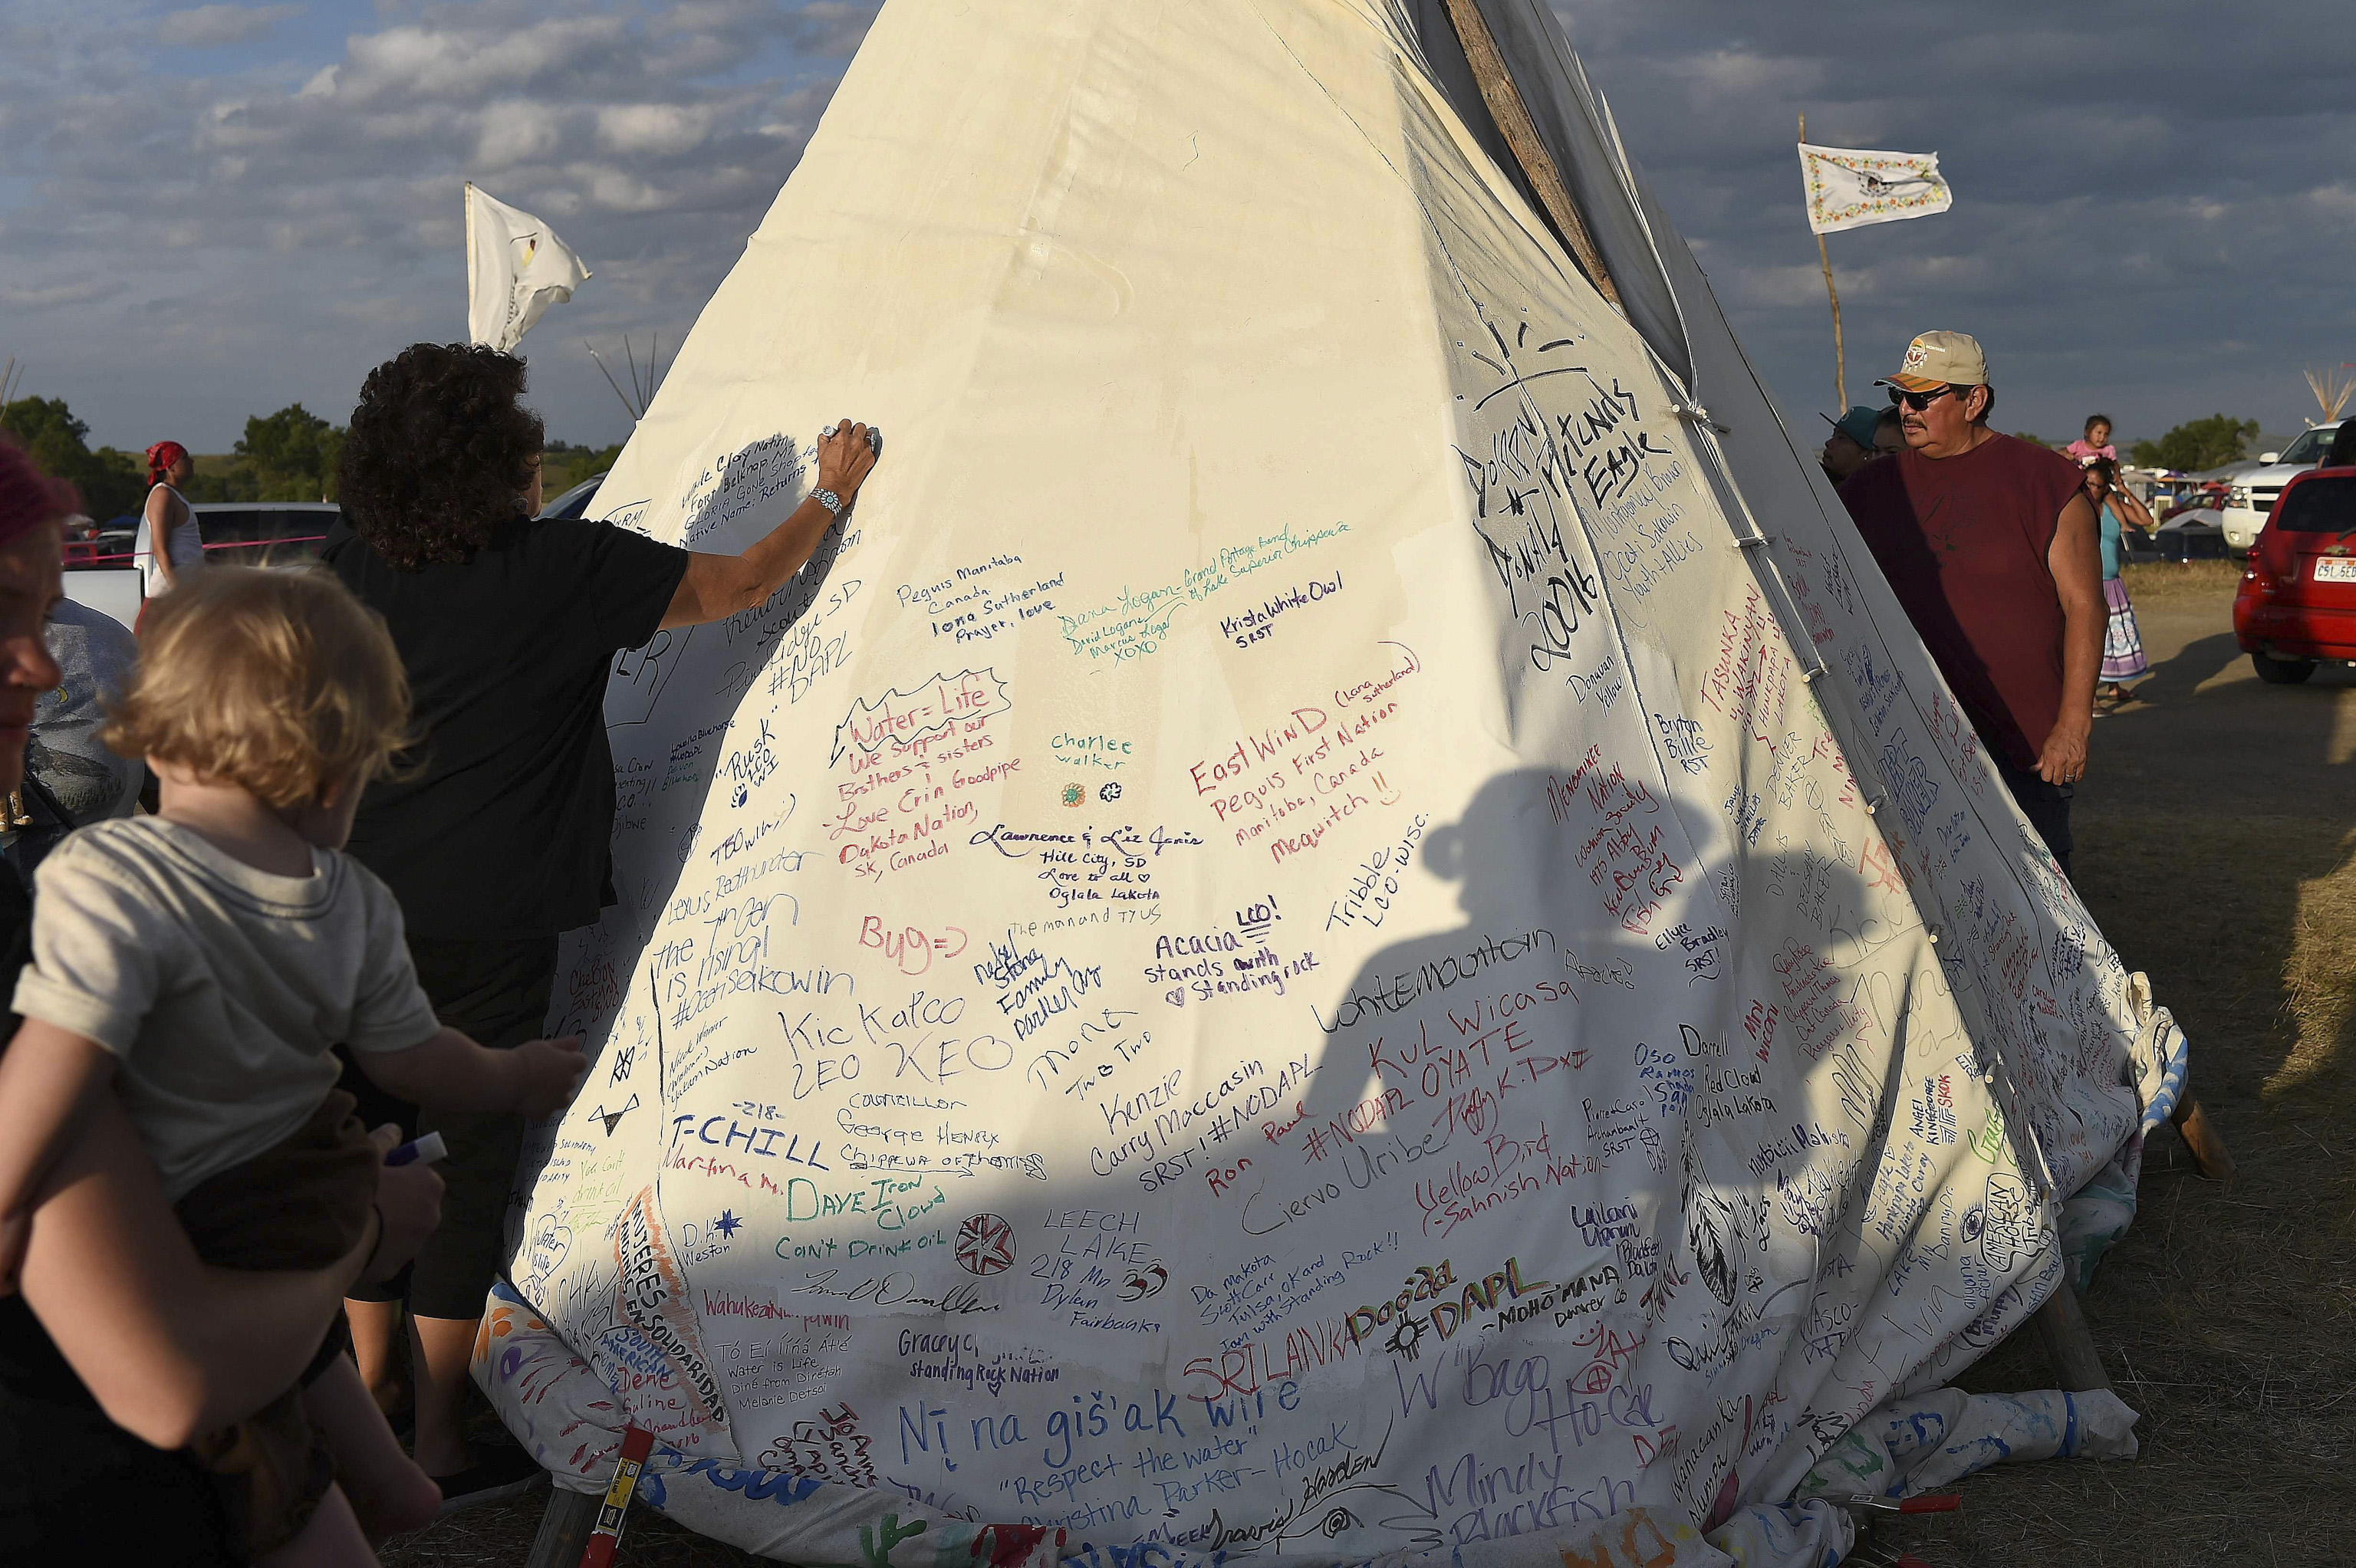 People sign a teepee with words of support for protestors at an encampment where hundreds of people gathered to join the Standing Rock Sioux Tribe's protest against the construction of the Dakota Access Pipe (DAPL), near Cannon Ball, North Dakota, on Sept. 3, 2016.